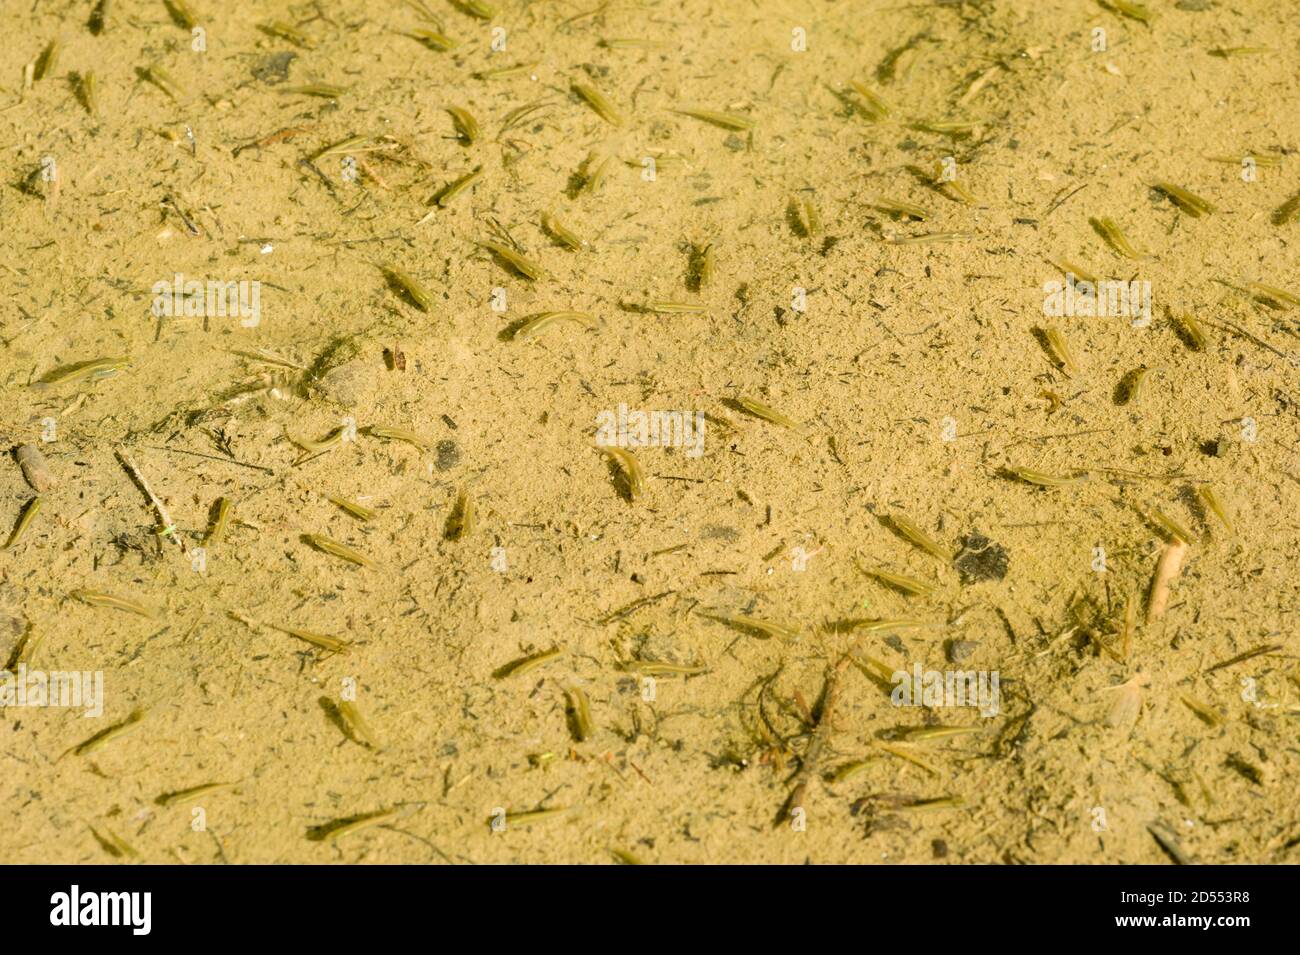 Freshwater small fishes camouflage on bottom sand of a pond, Gambusia affinis, mosquitofish Stock Photo